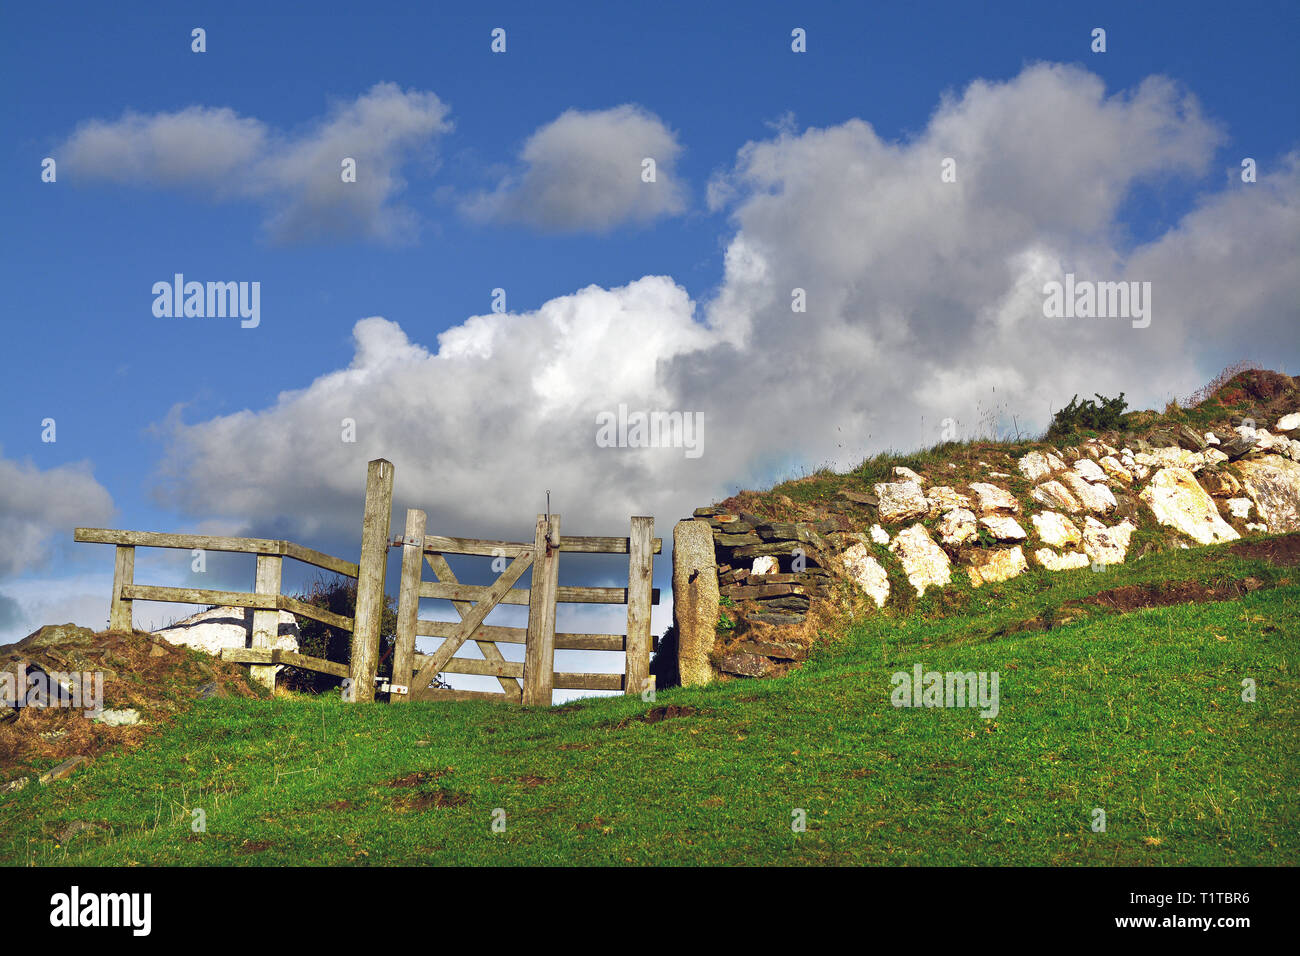 Landscape near Boscastle and Tintagel in C Cornwall (UK): a meadow, an old Cornish stone wall with a fence and a vast blue sky with some clouds. Stock Photo